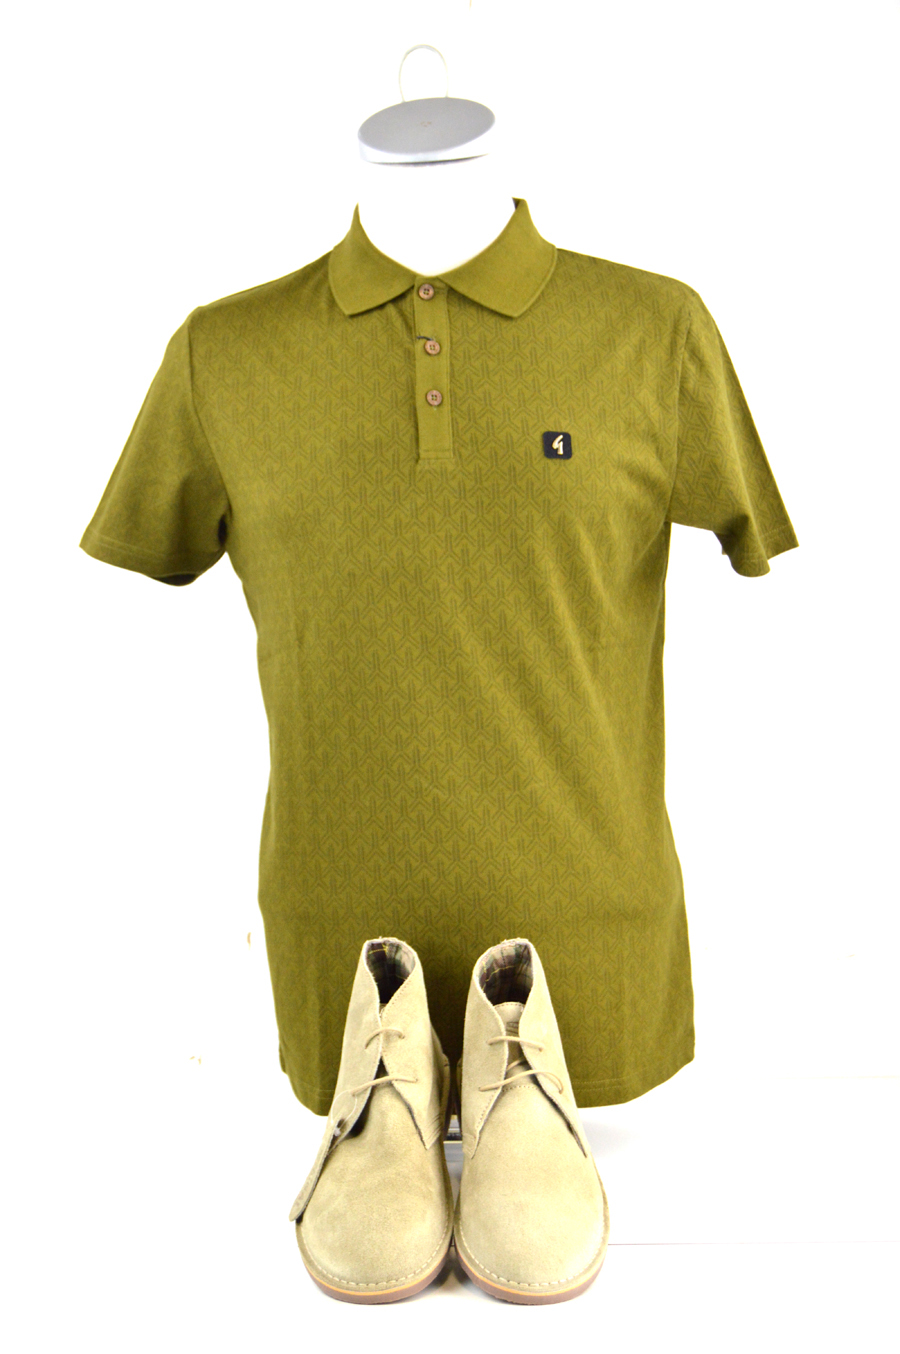 04 mod shoes desert boots and gabicci polo top